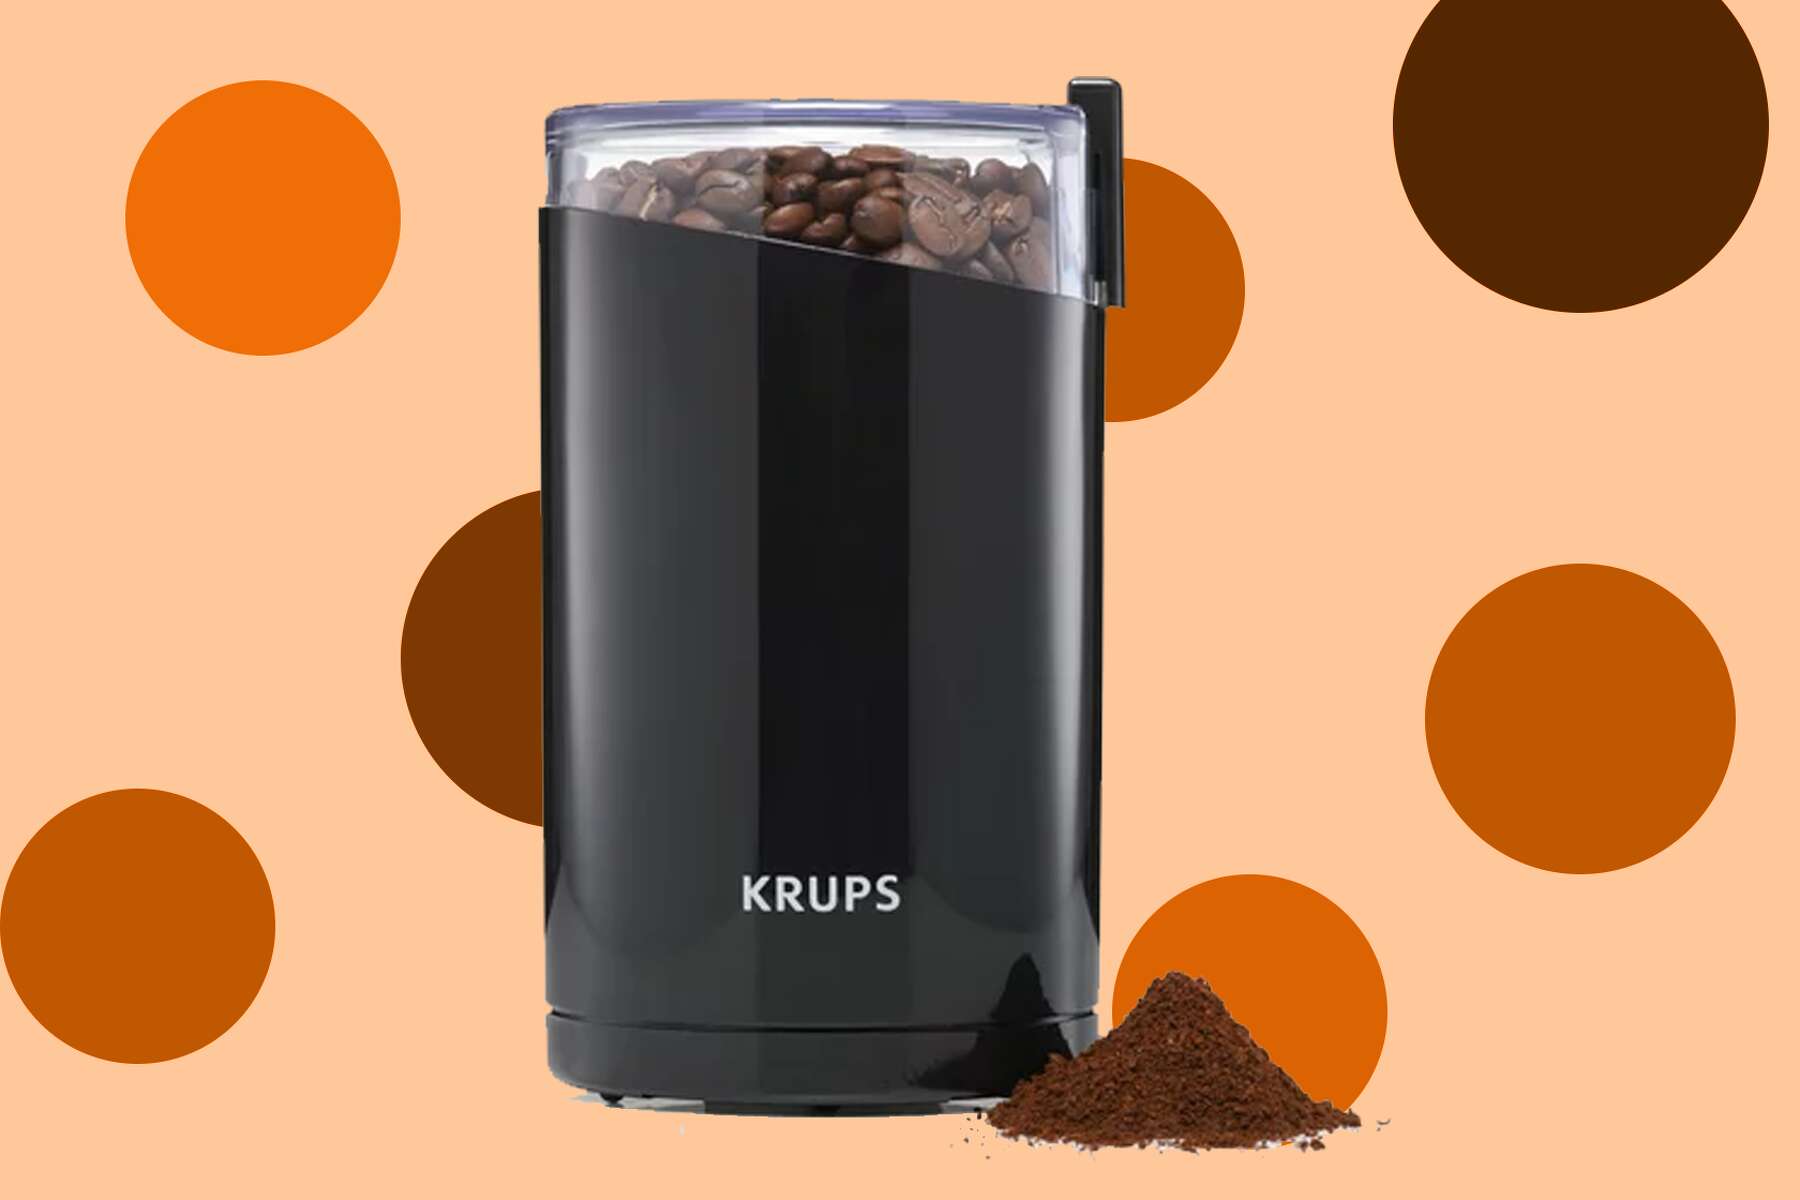 Krups Electric Coffee And Spice Grinder